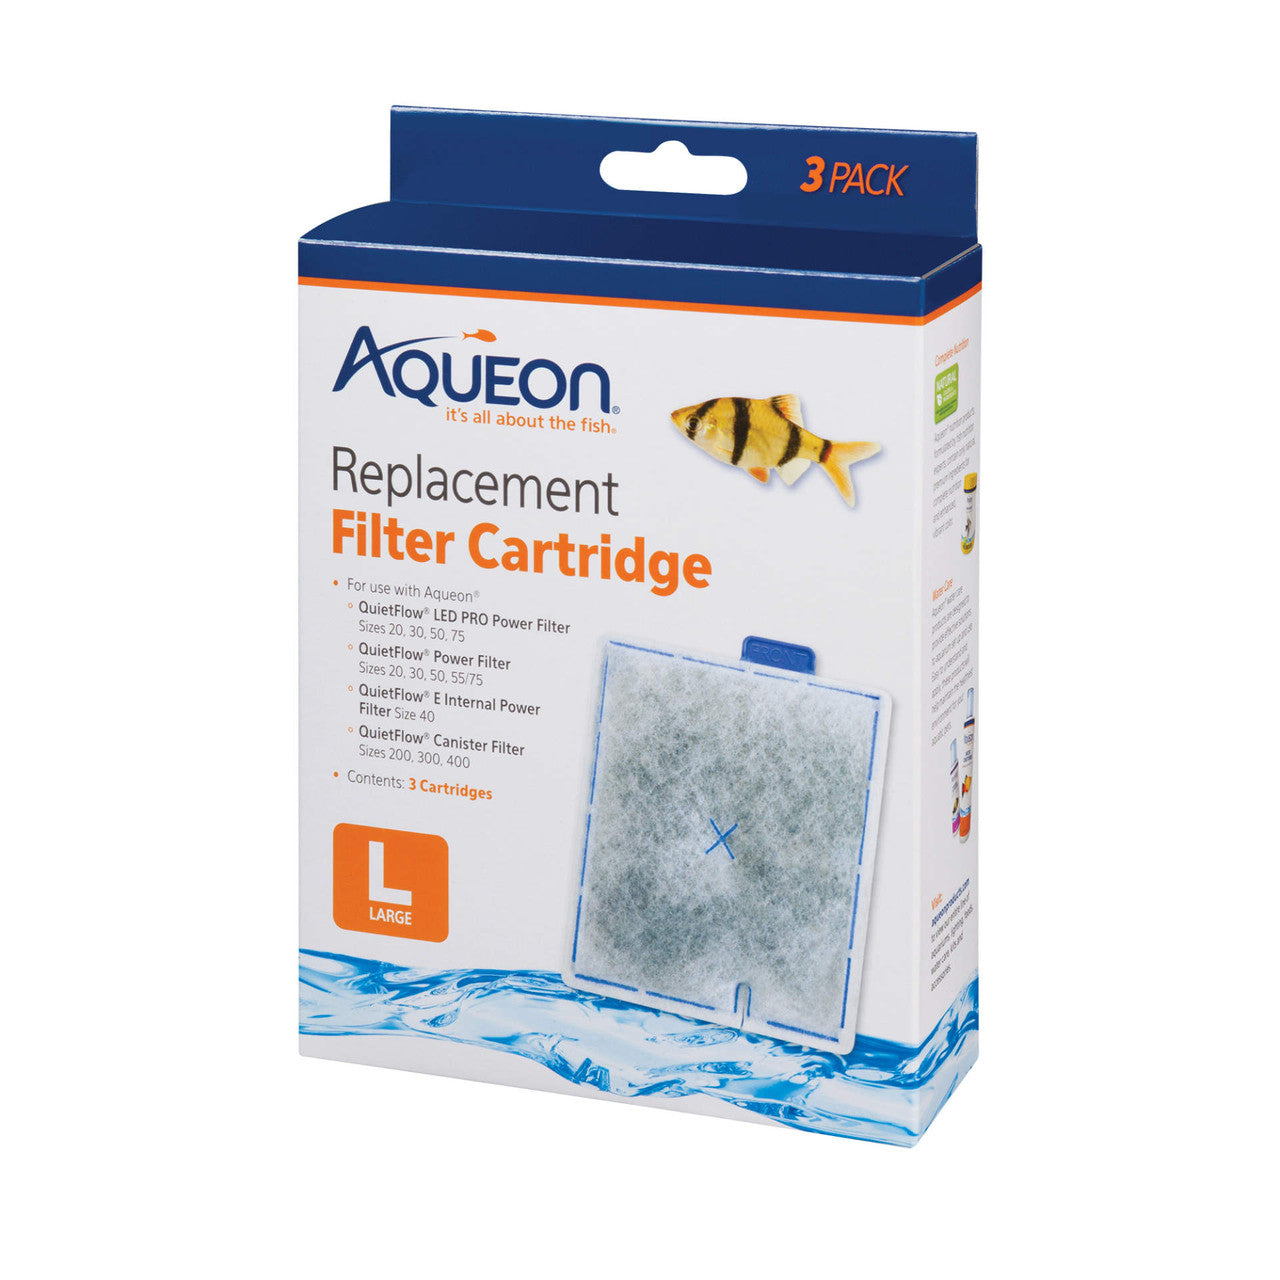 Aqueon Replacement Filter Cartridges Large - 3 pack